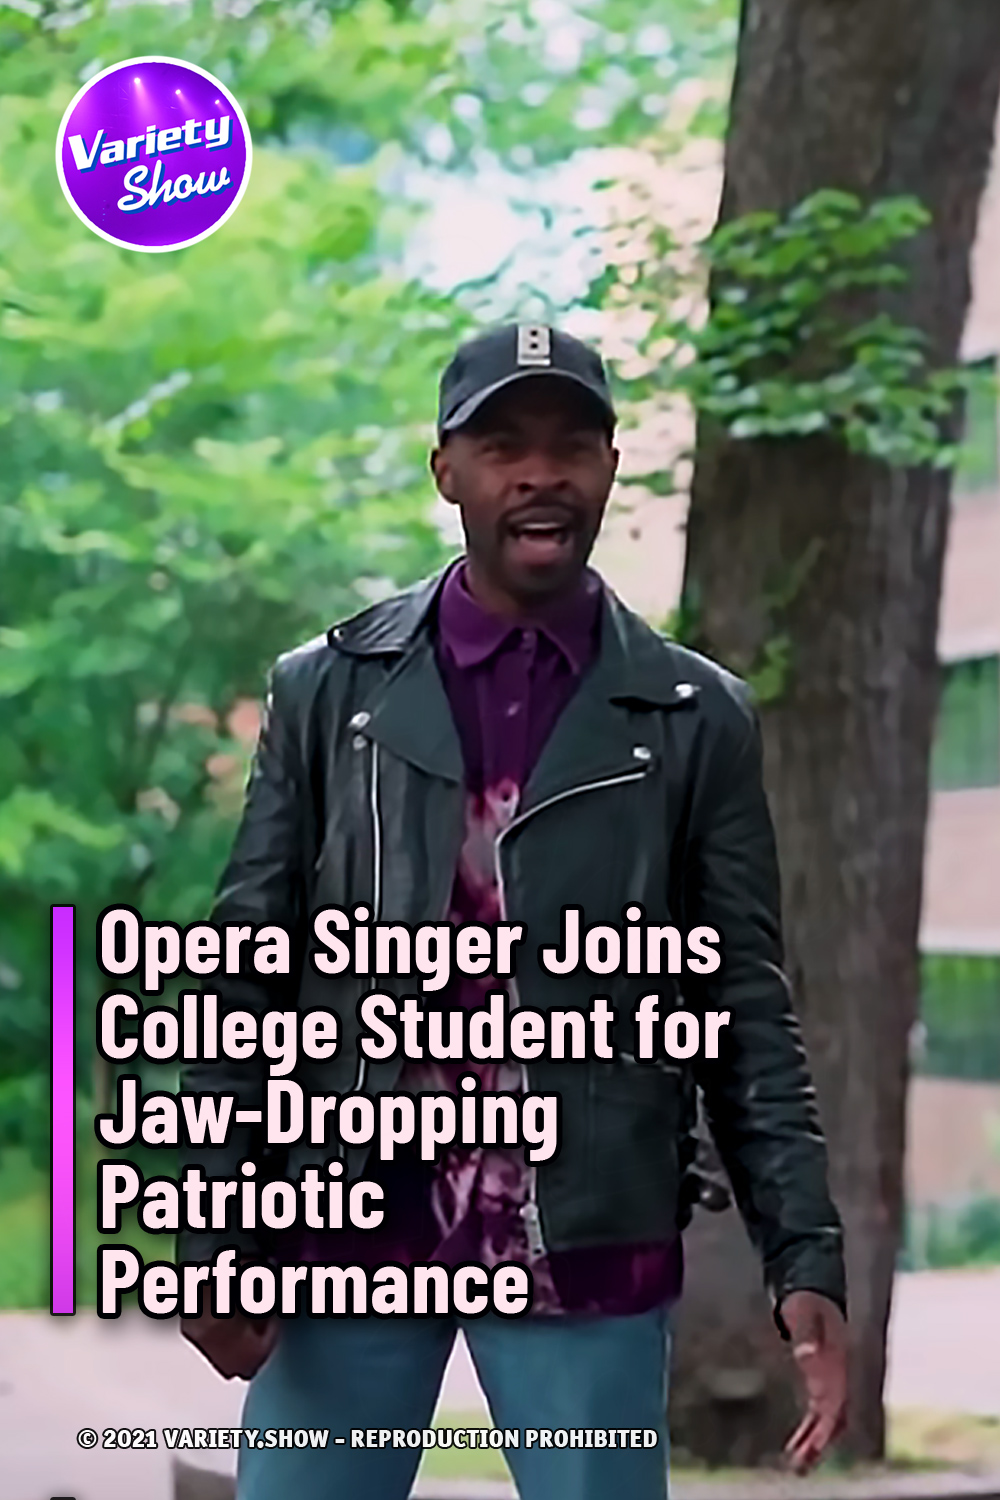 Opera Singer Joins College Student for Jaw-Dropping Patriotic Performance